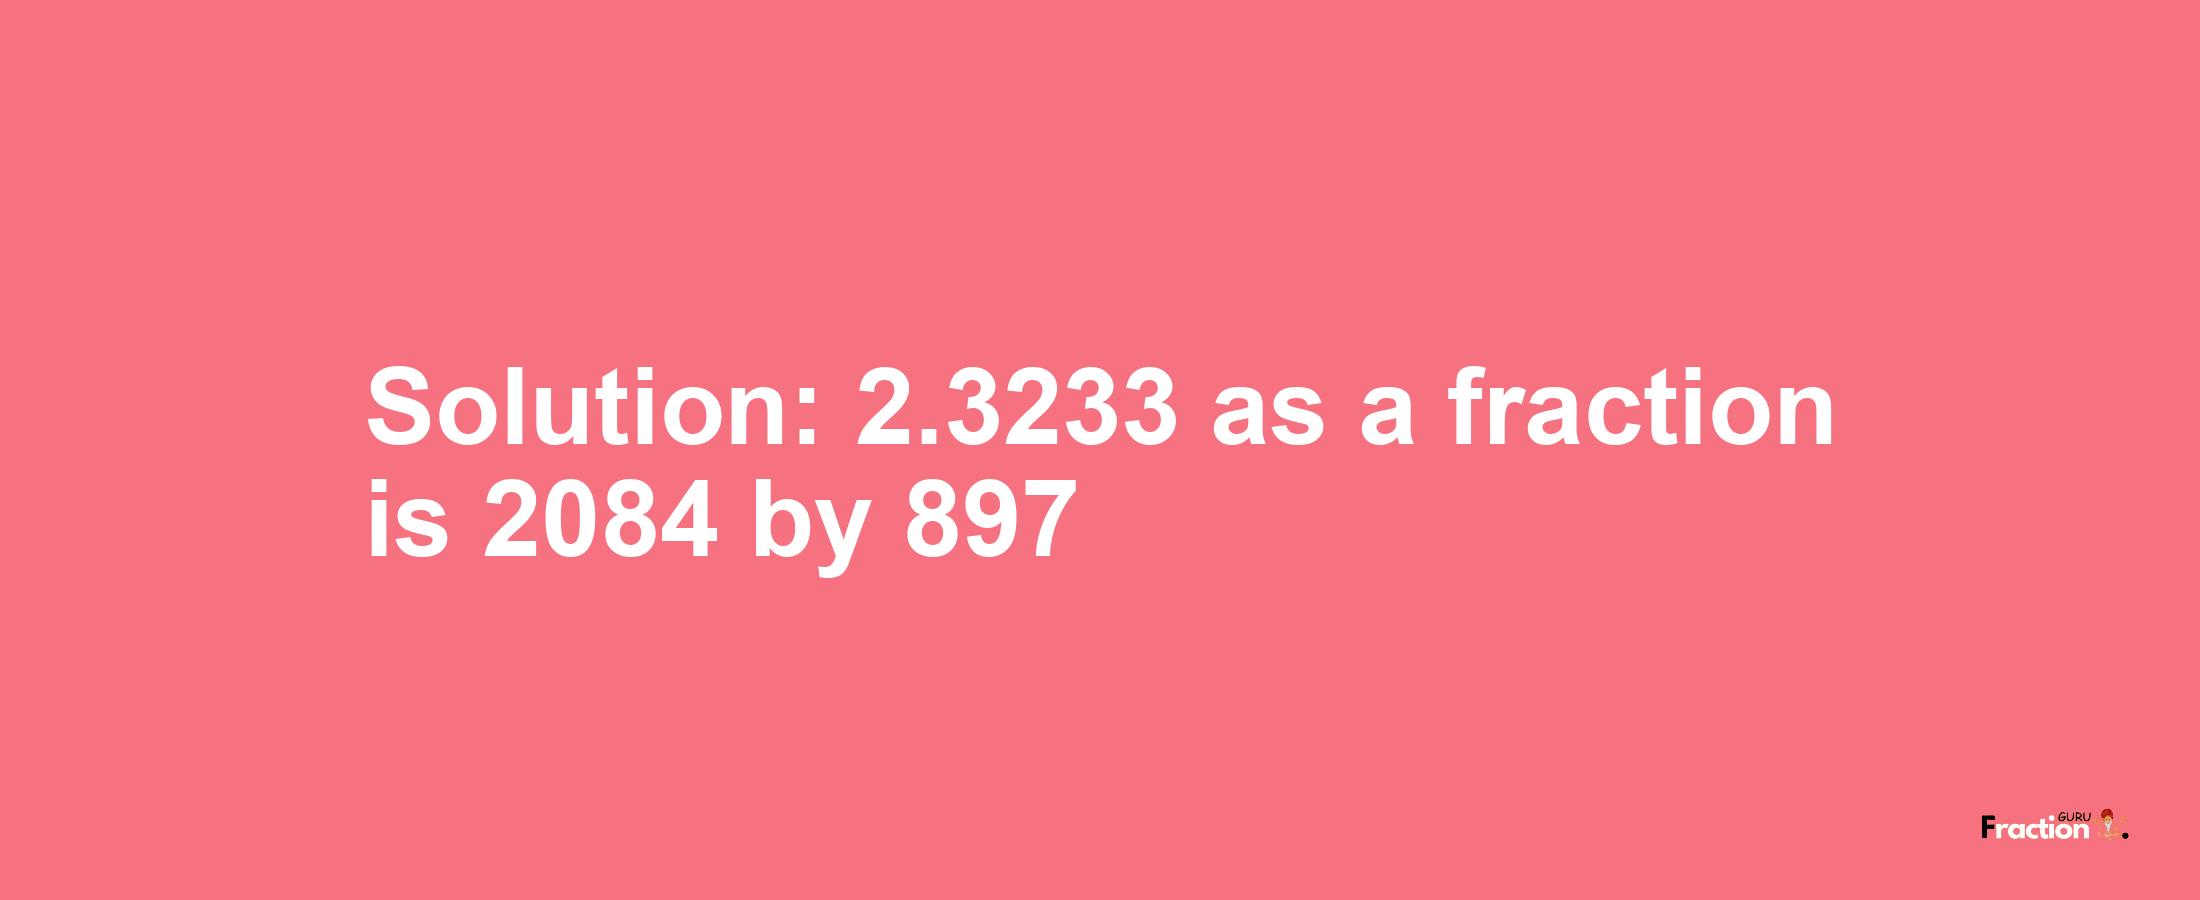 Solution:2.3233 as a fraction is 2084/897